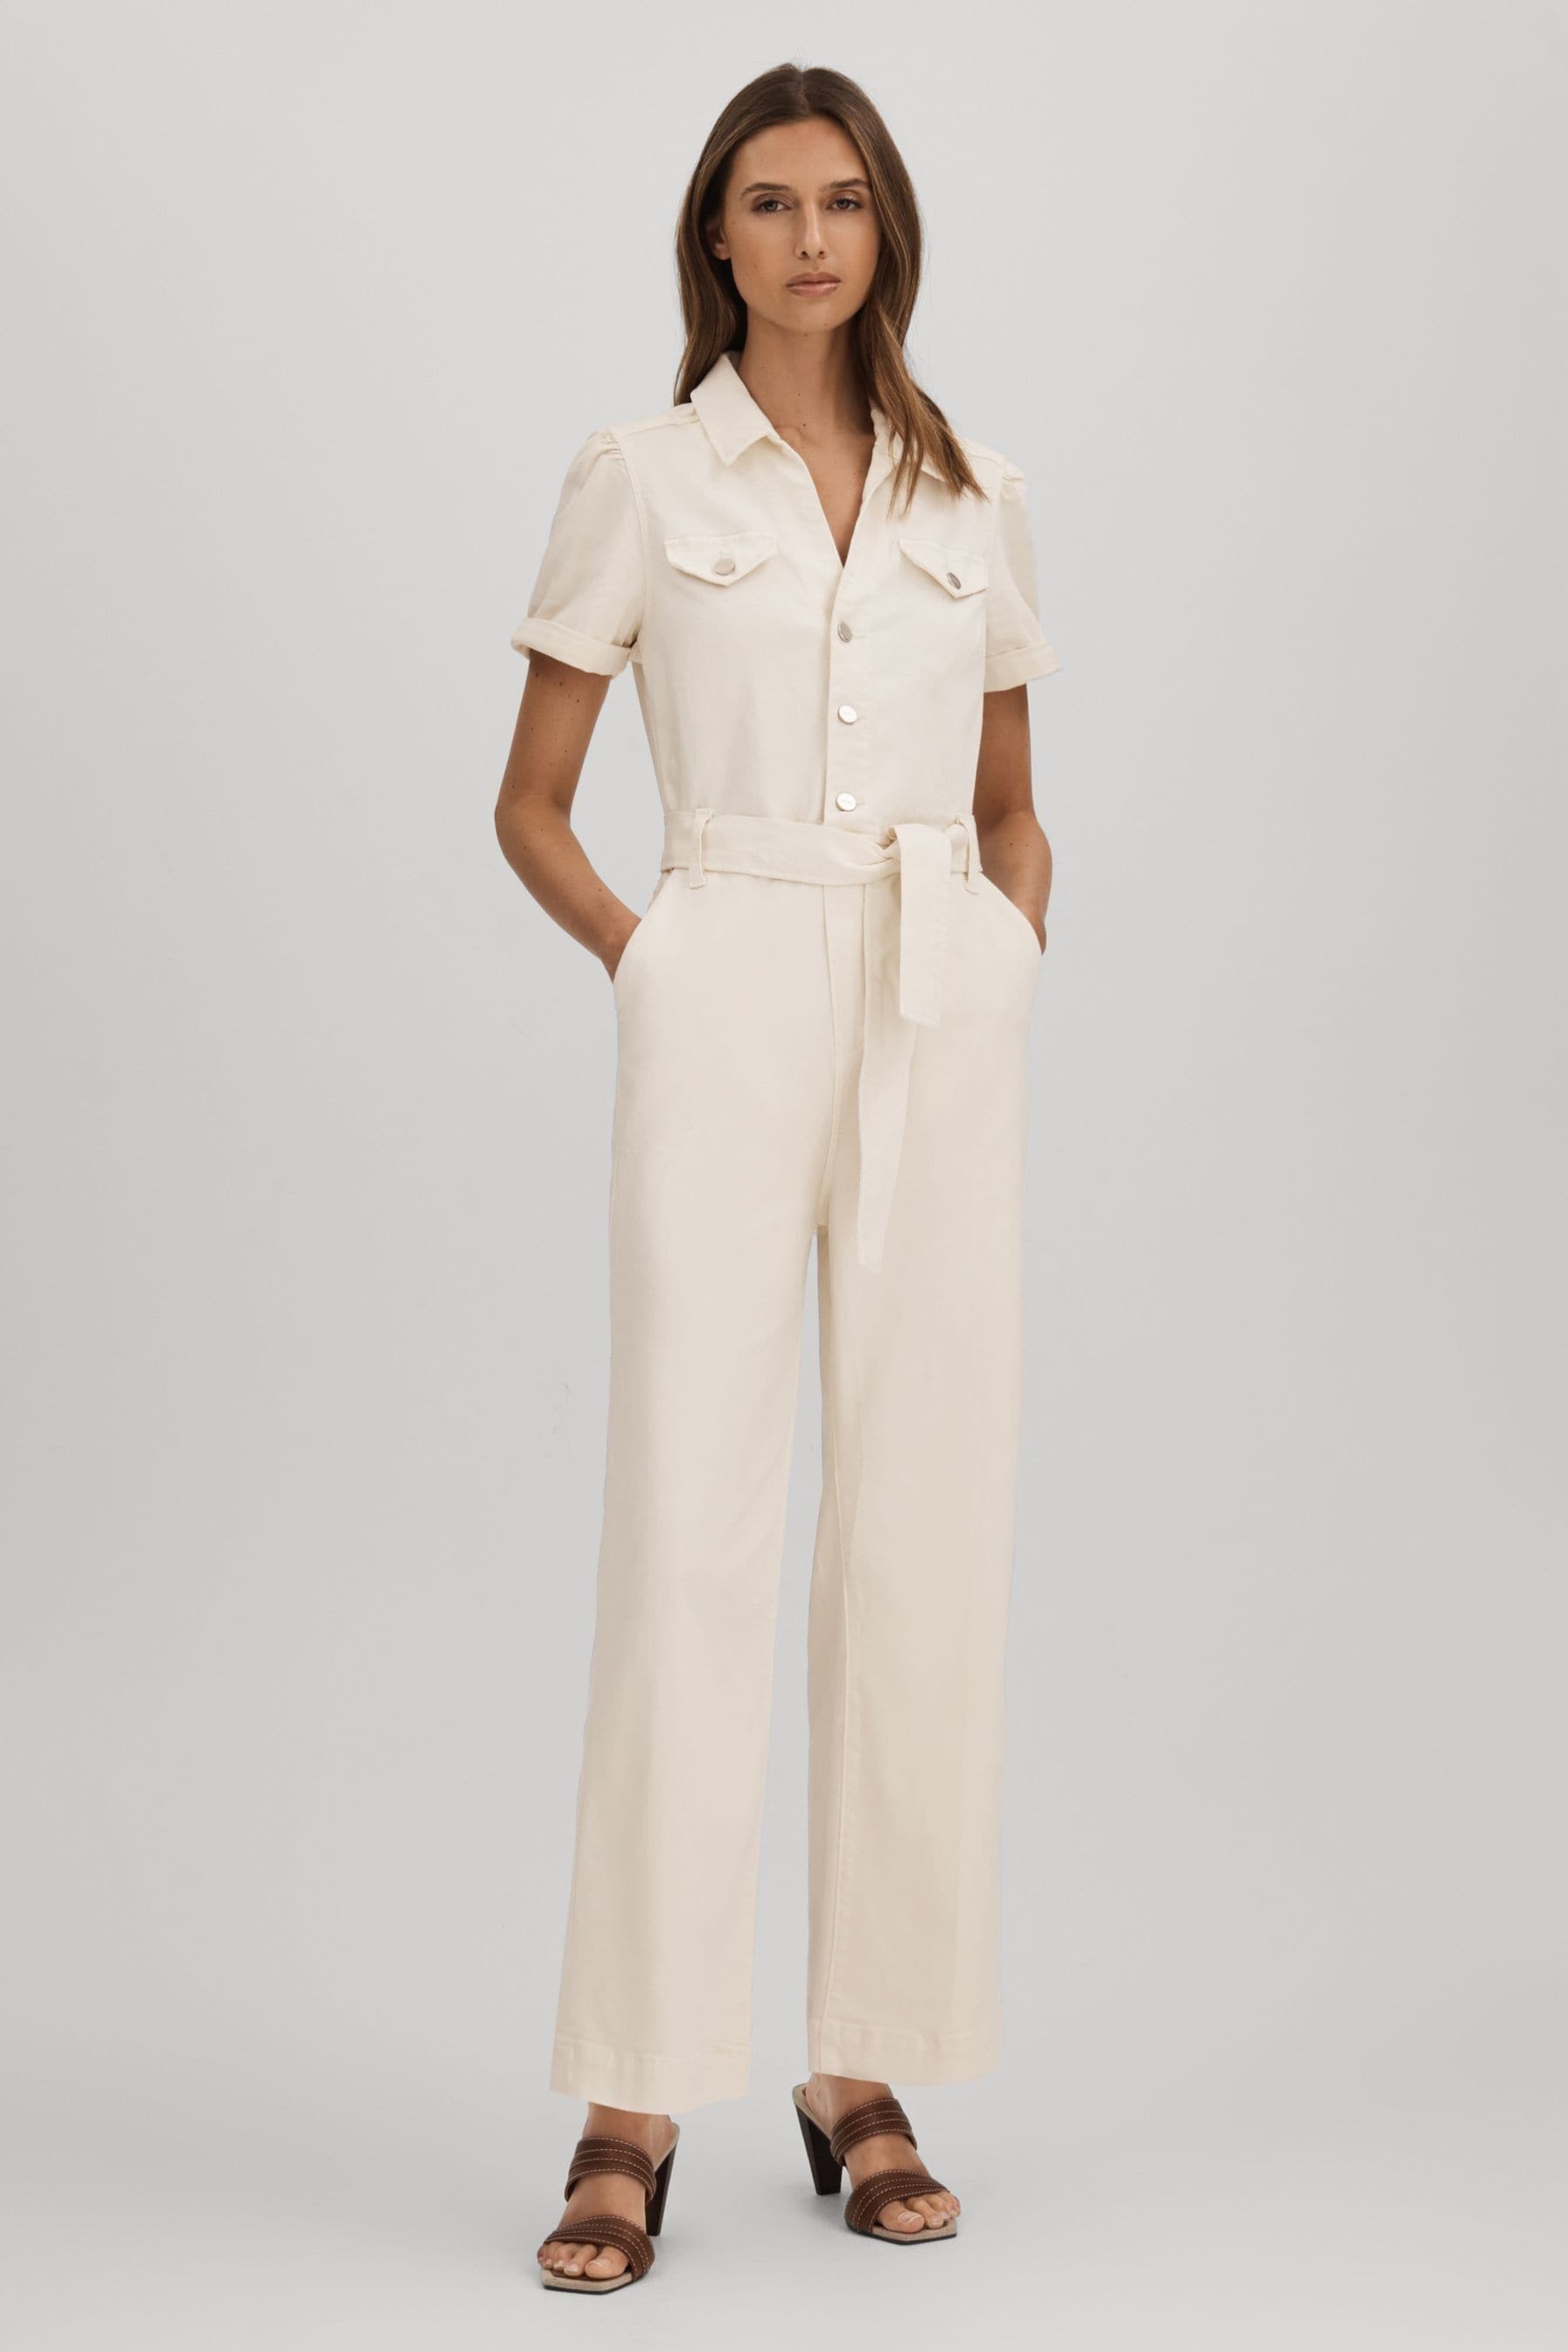 Paige Denim Puff Sleeve Jumpsuit In White